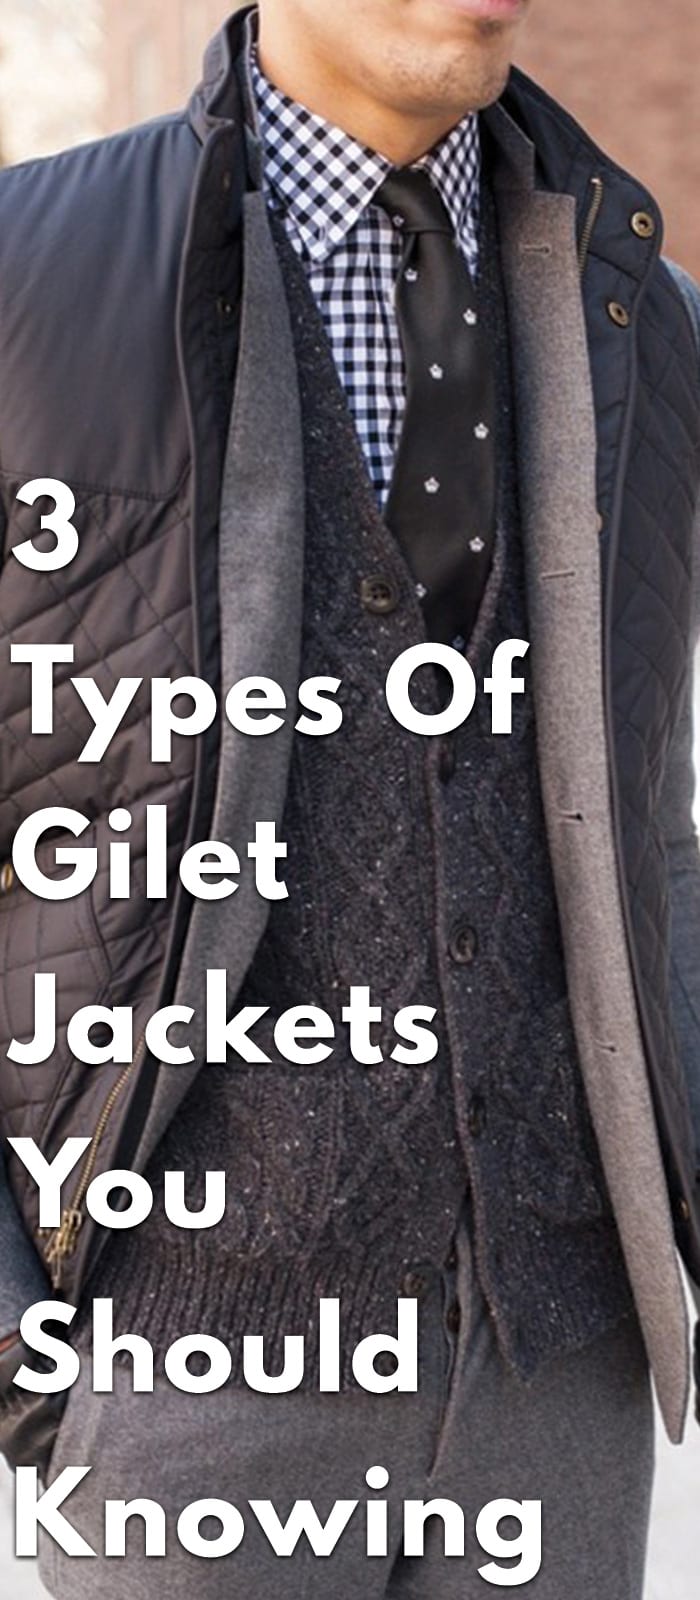 3-Types-Of-Gilet-Jackets-You-Should-Knowing